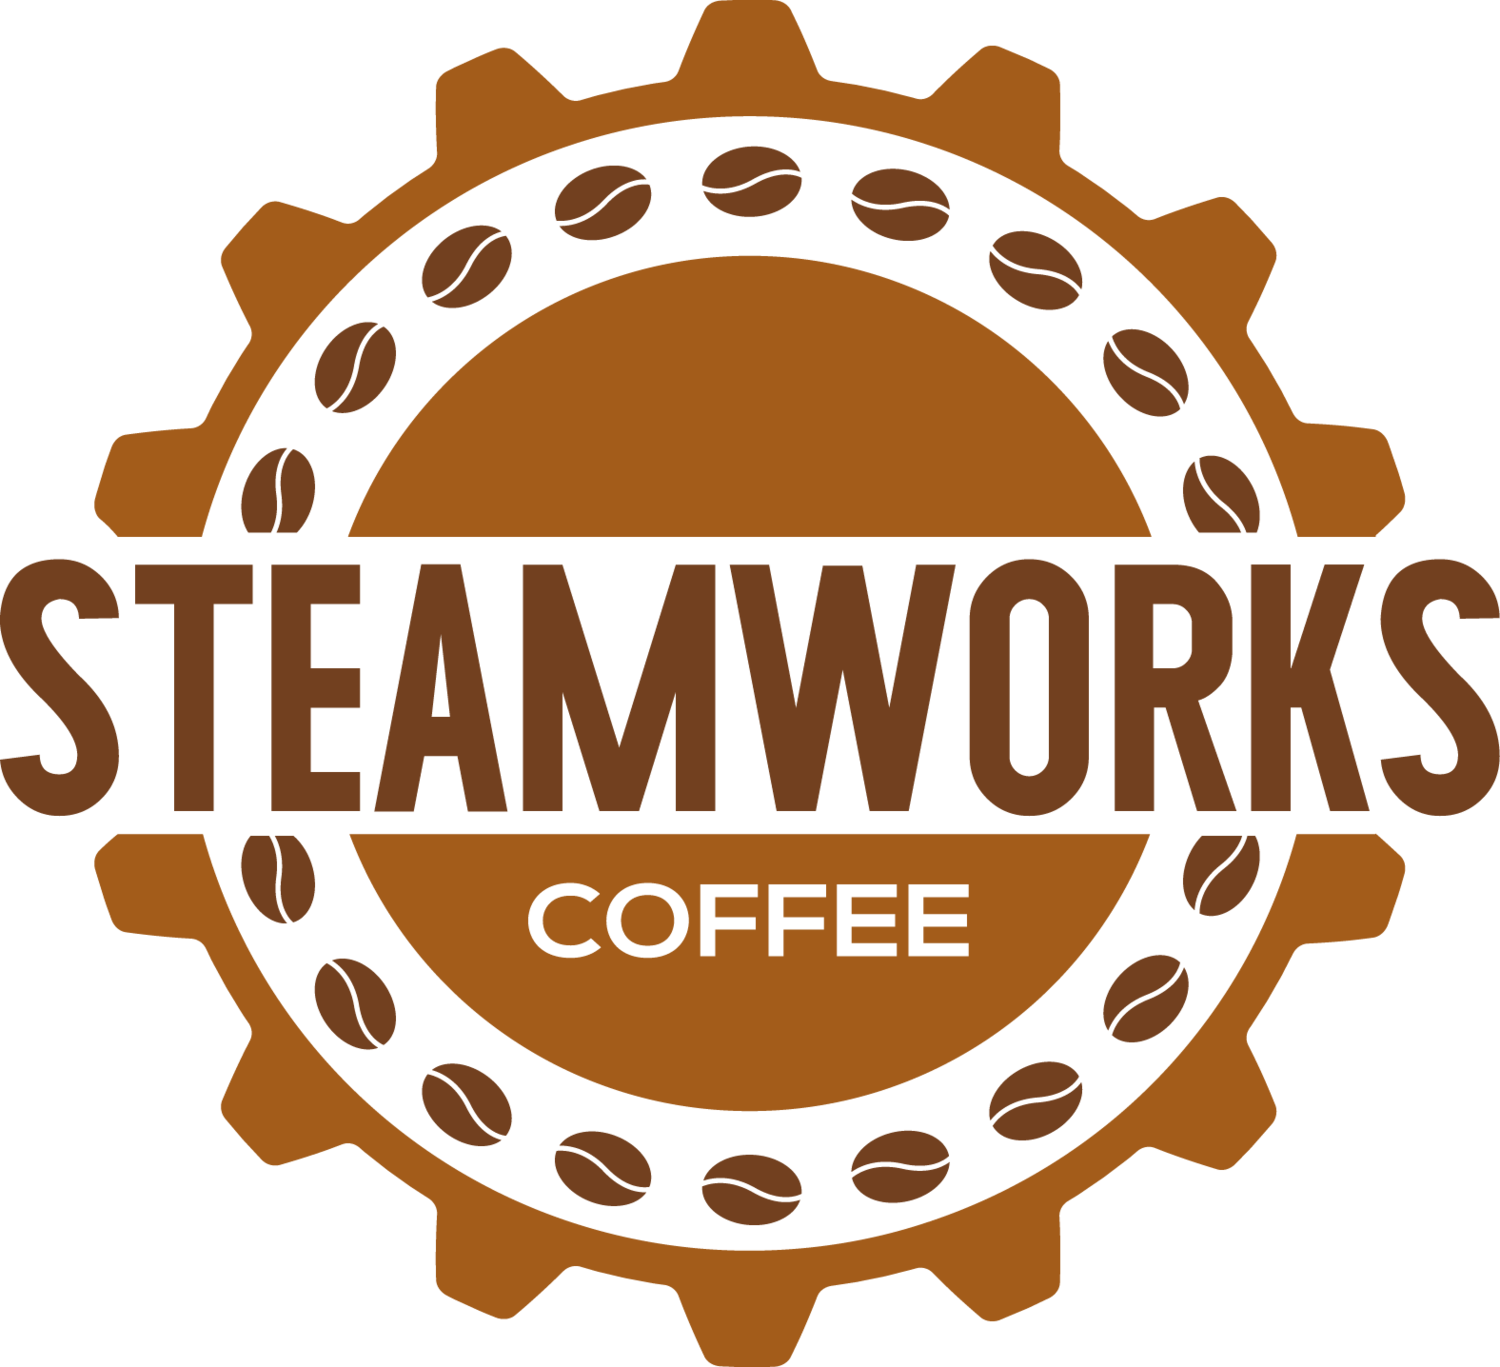 Steamworks Craft Roasted Specialty Coffee